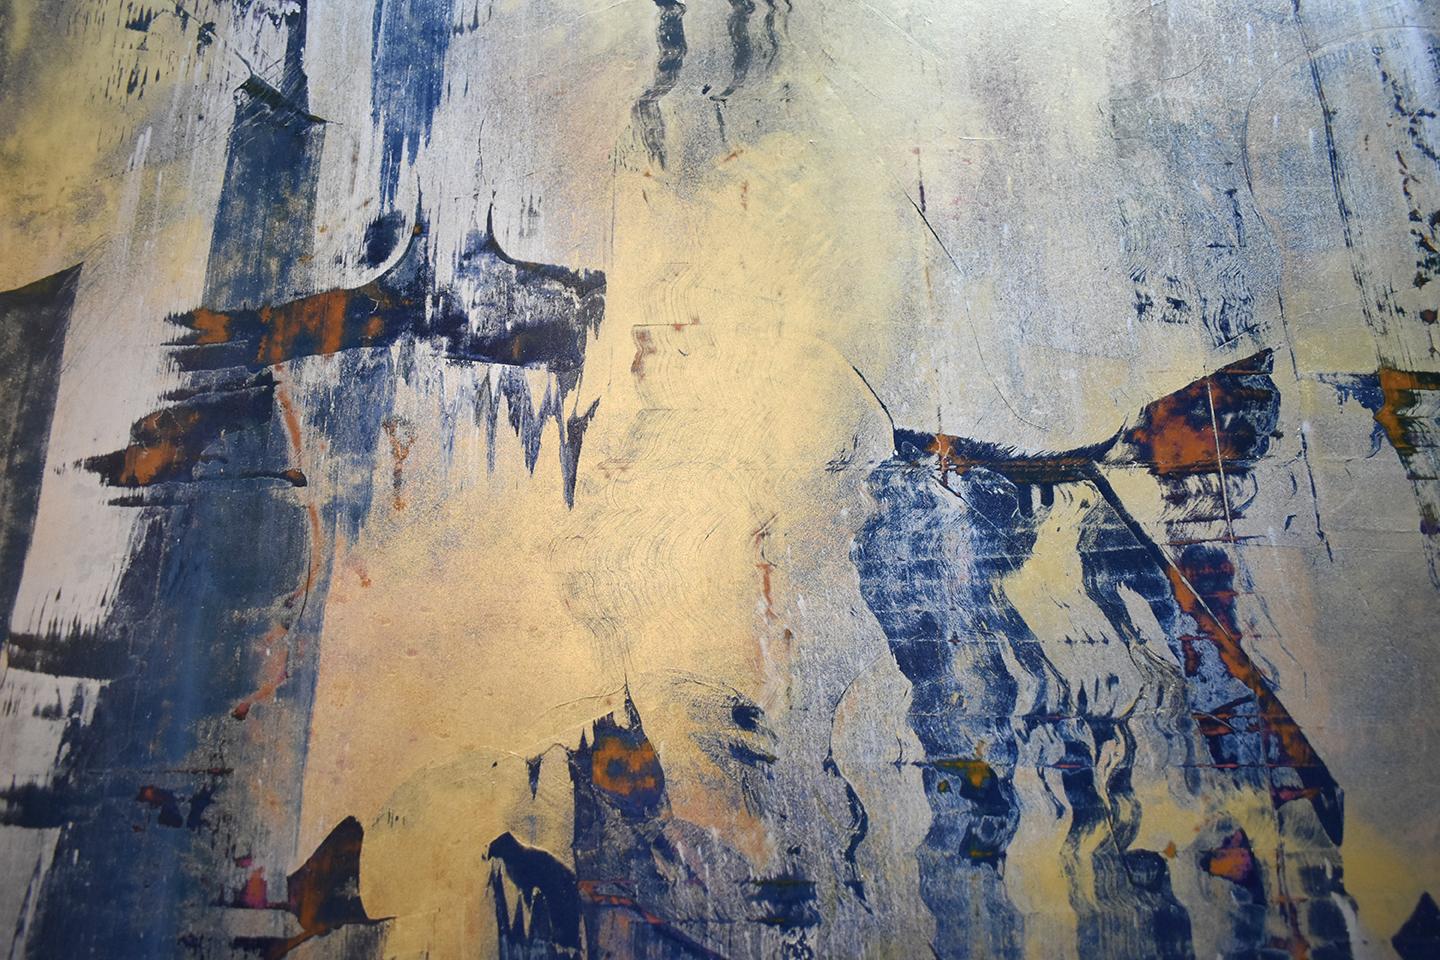 A Short Walk on the Wild Side (Abstract Work on Paper, Gold Metallic Powders) - Contemporary Painting by Bruce Murphy